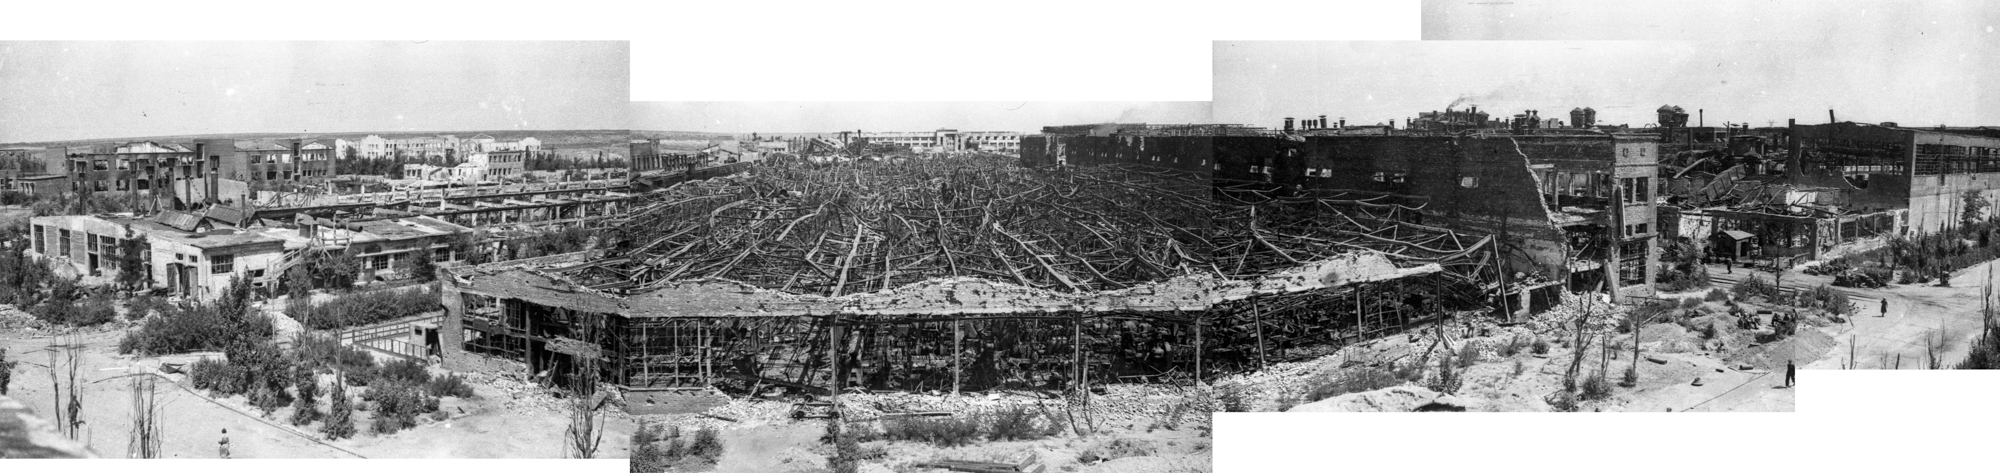 Stalingrad Tractor Plant: Ugly Scale of Destruction